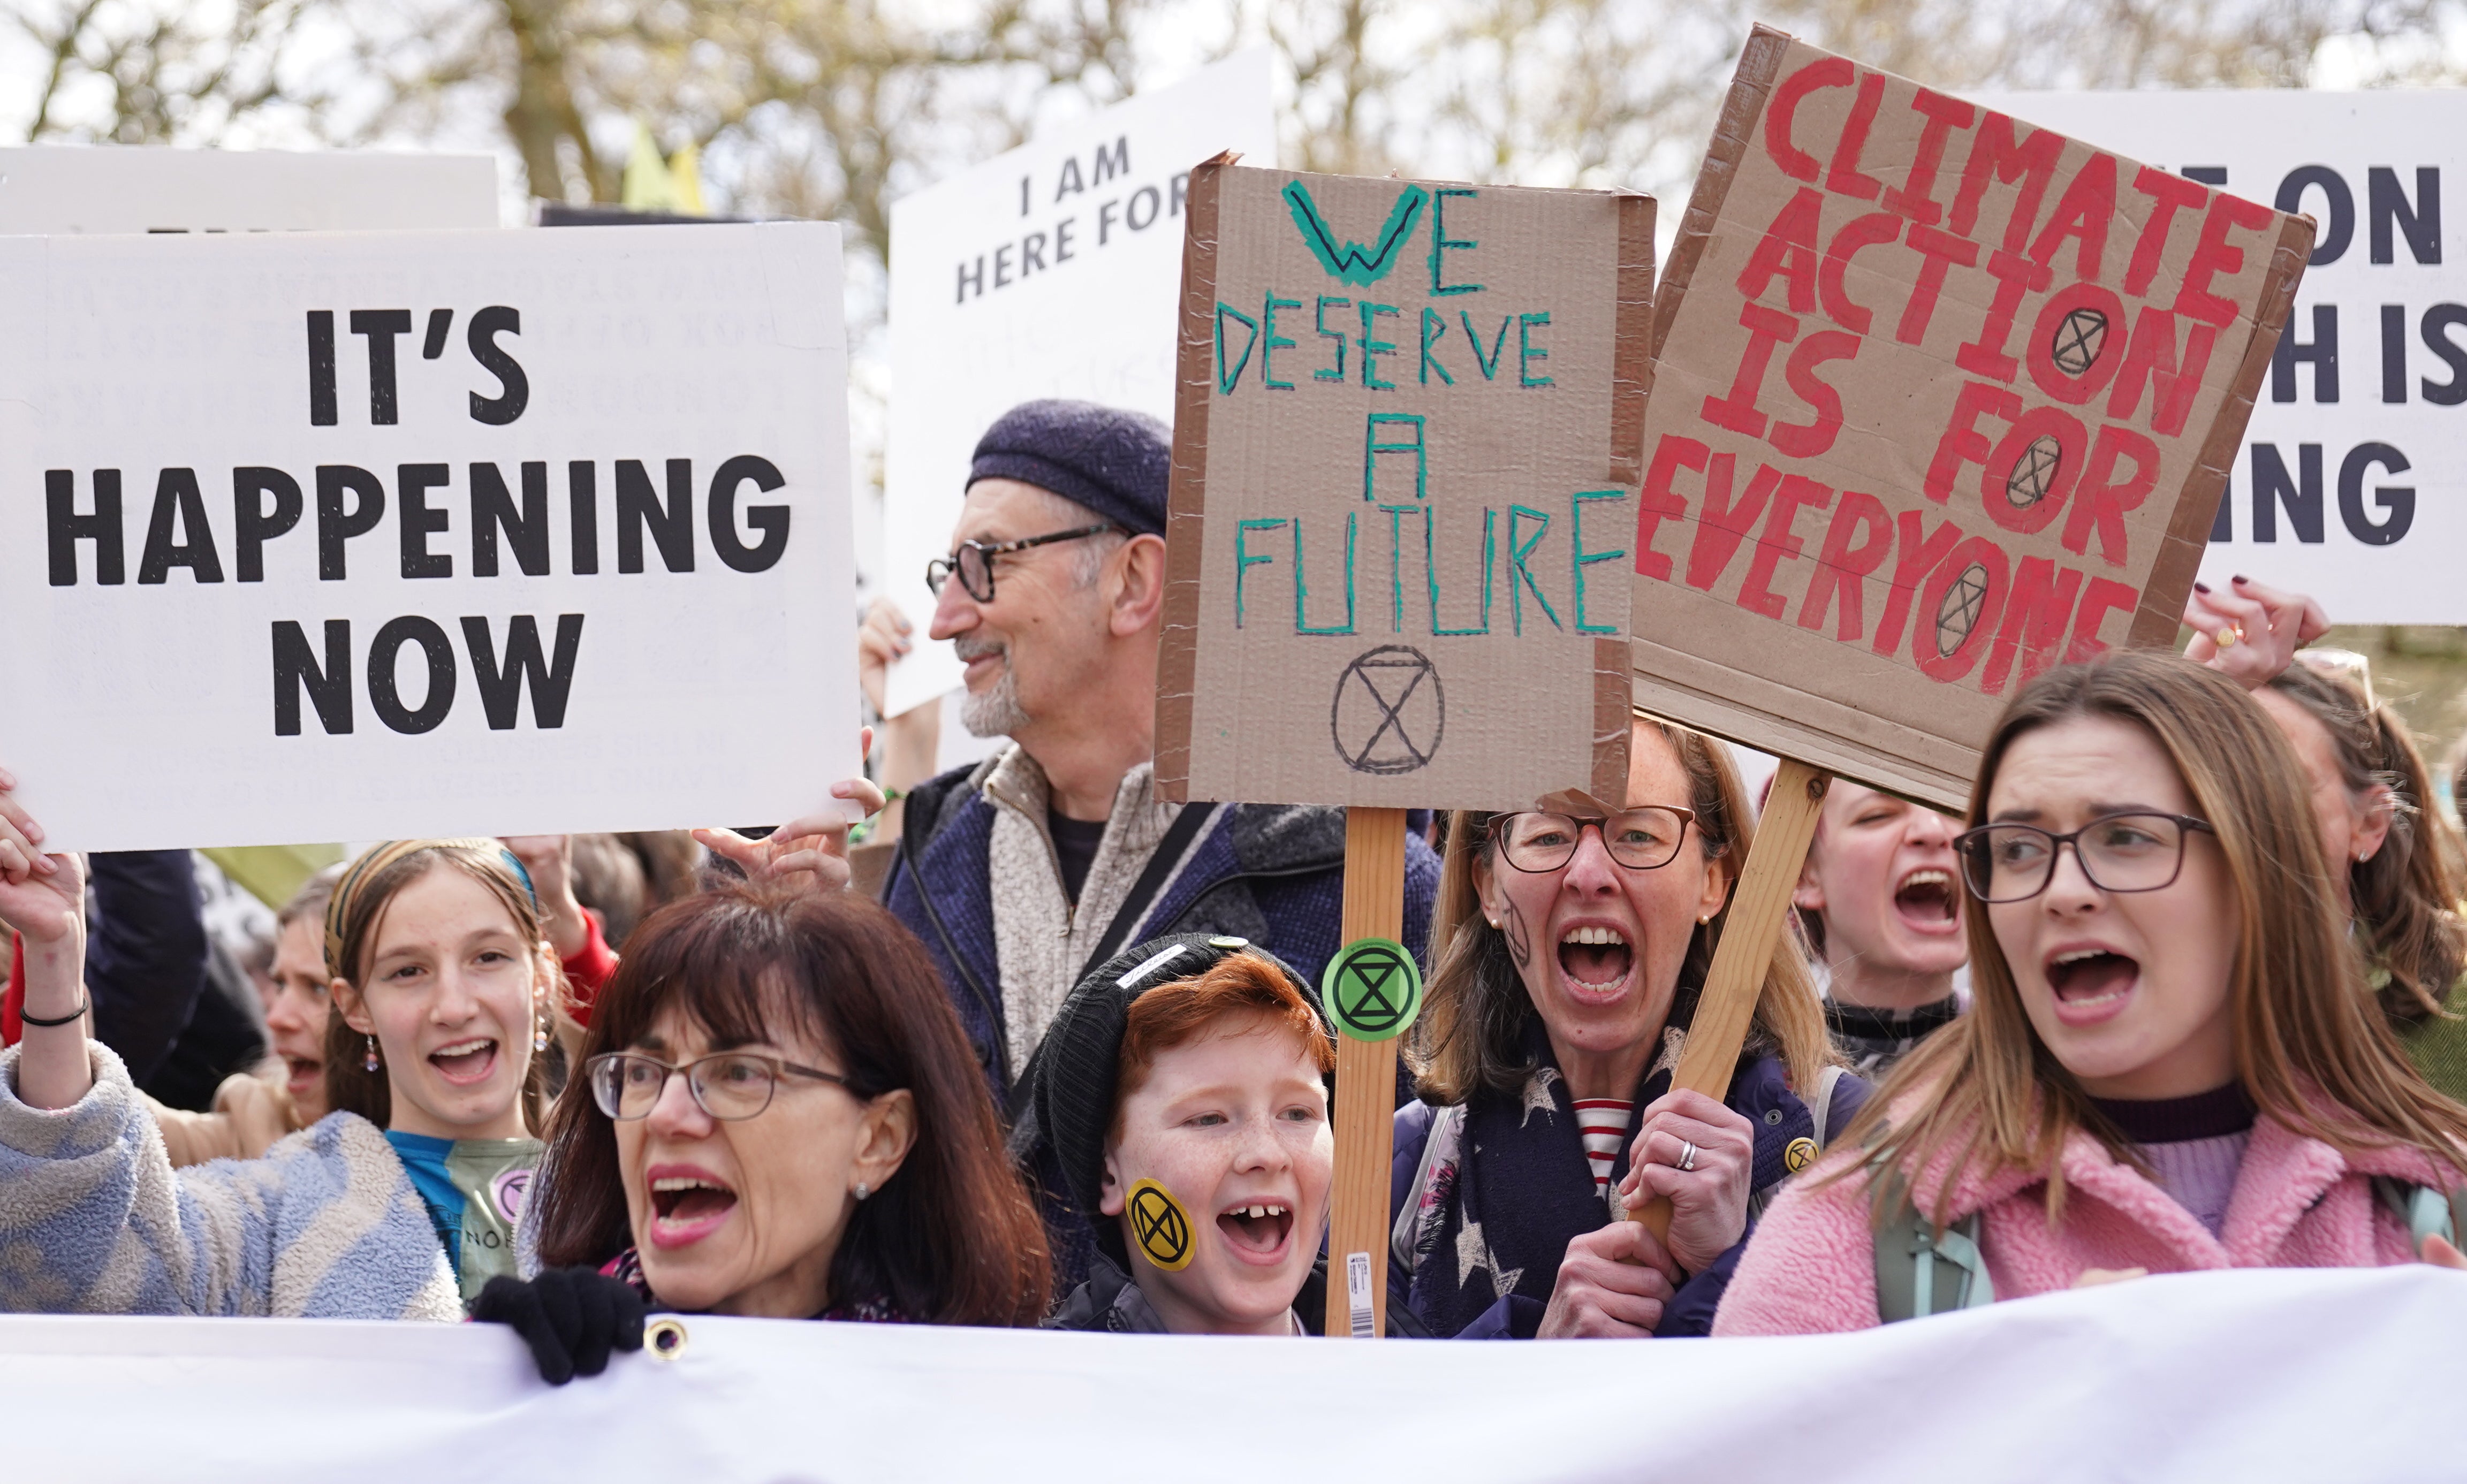 Activists from Extinction Rebellion at a previous climate change demonstration in Hyde Park central London in April (Stefan Rousseau/PA)